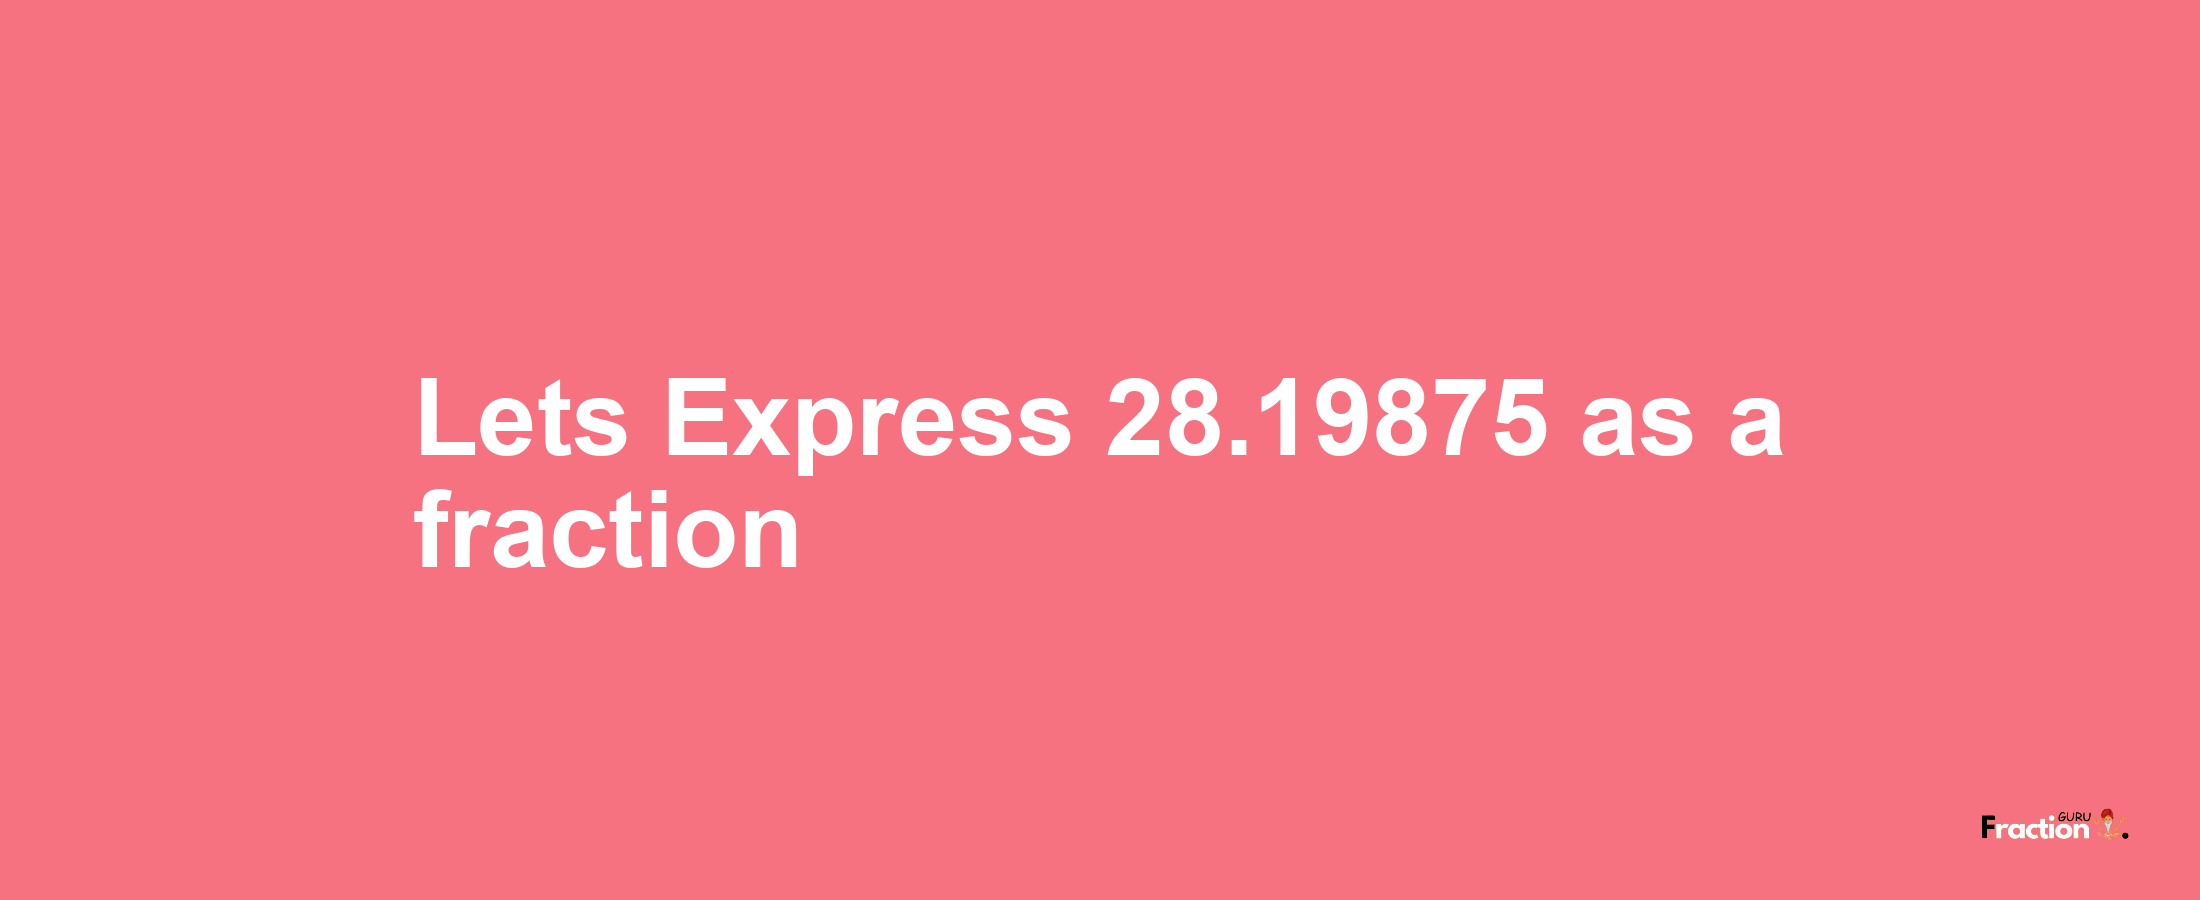 Lets Express 28.19875 as afraction